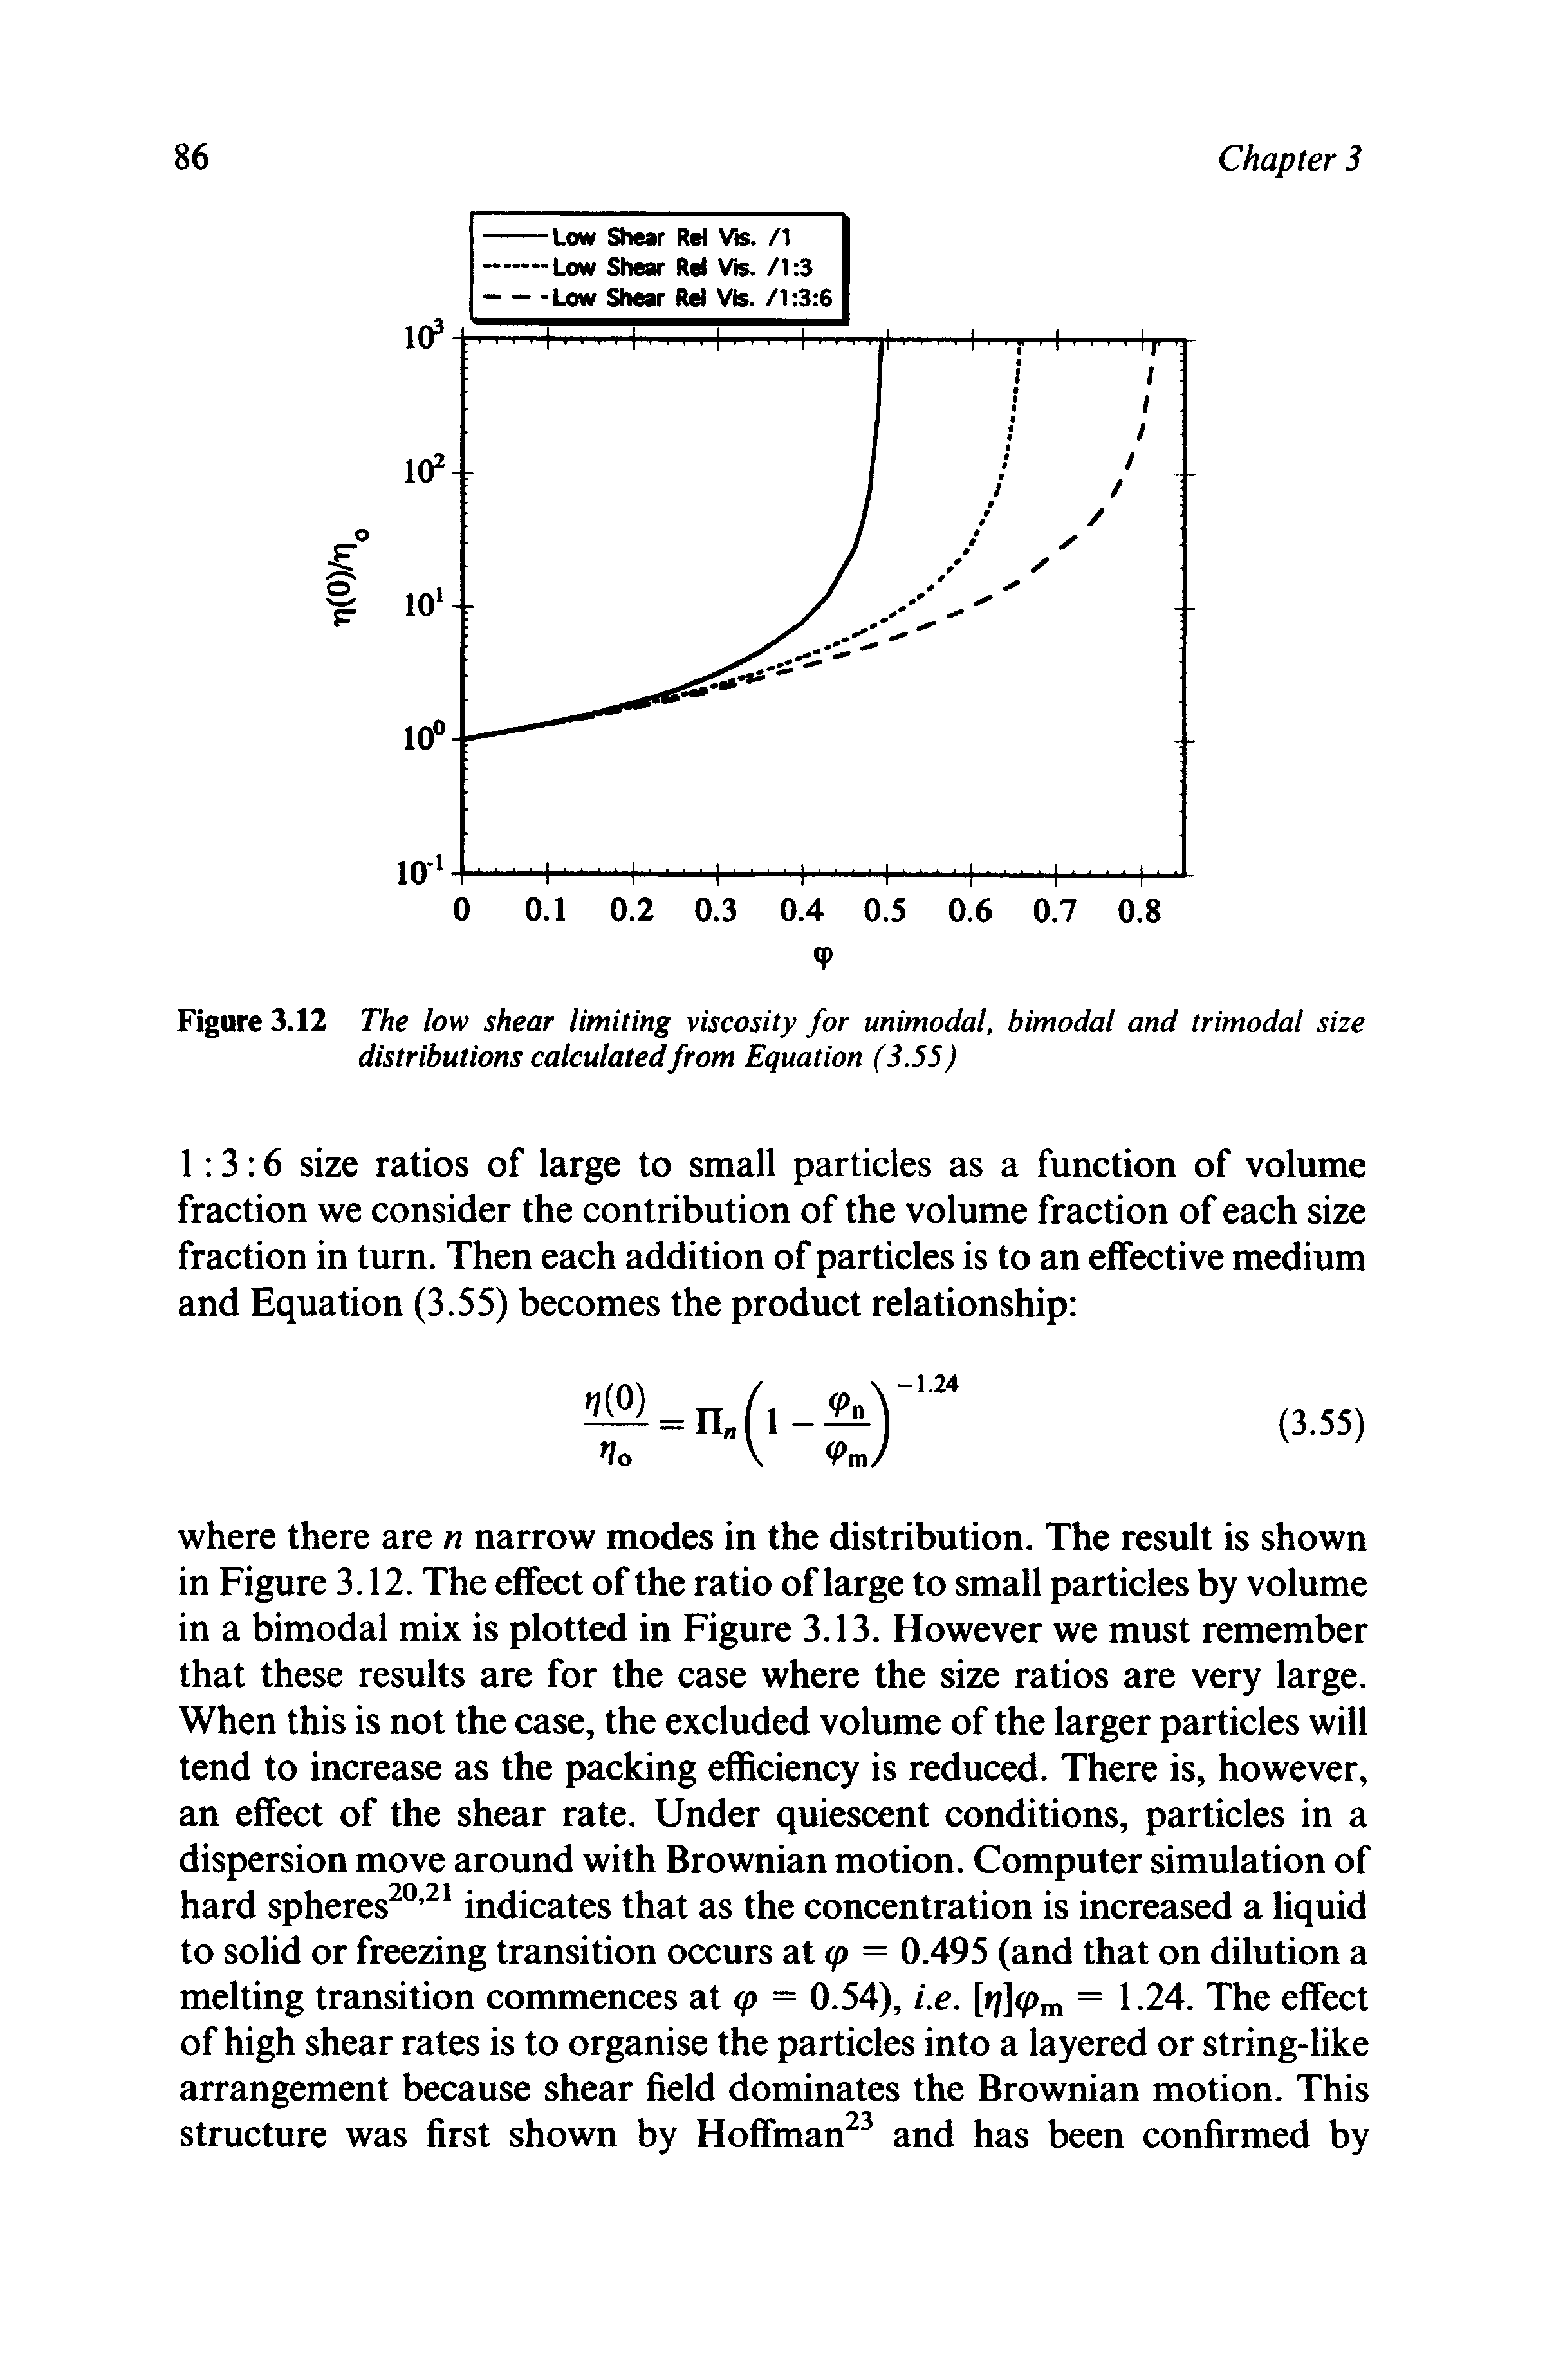 Figure 3.12 The low shear limiting viscosity for unimodal, bimodal and trimodal size distributions calculated from Equation (3.55 )...